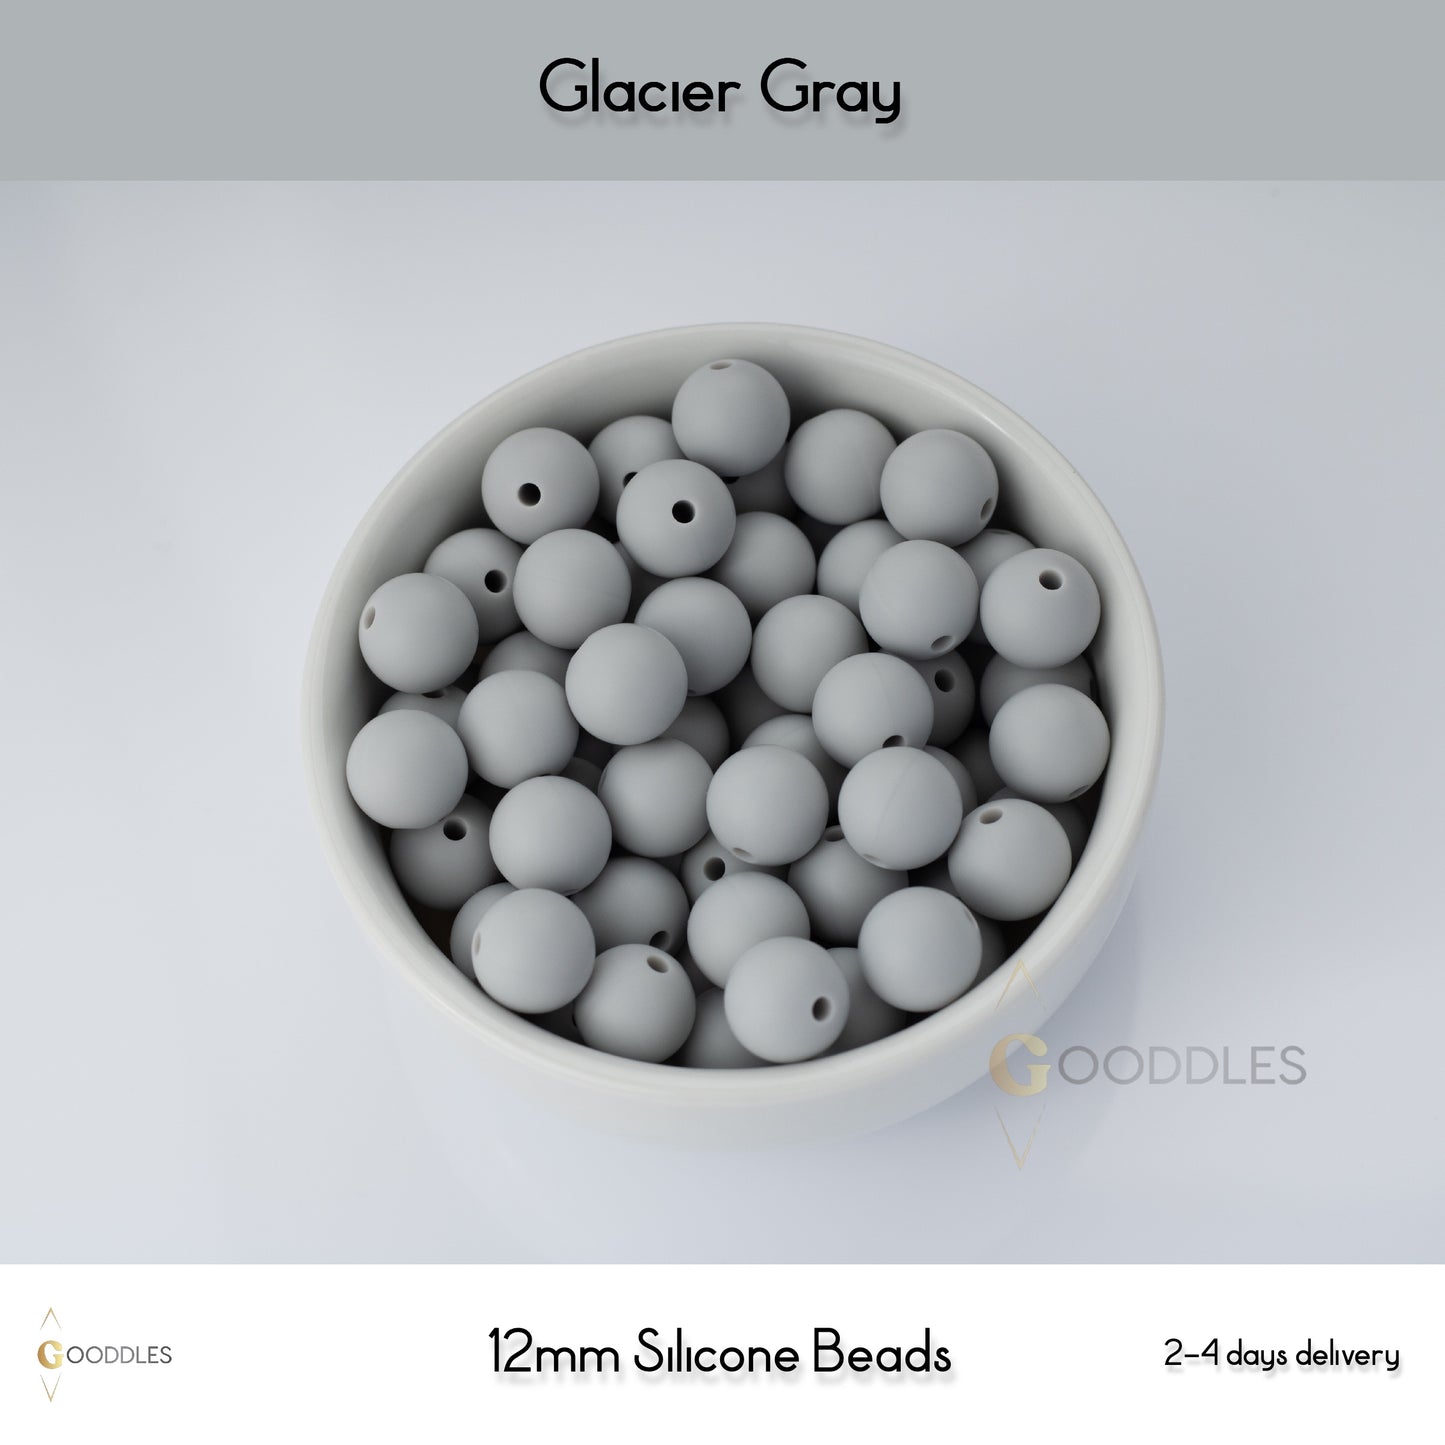 5pcs, Glacier Gray Silicone Beads Round Silicone Beads